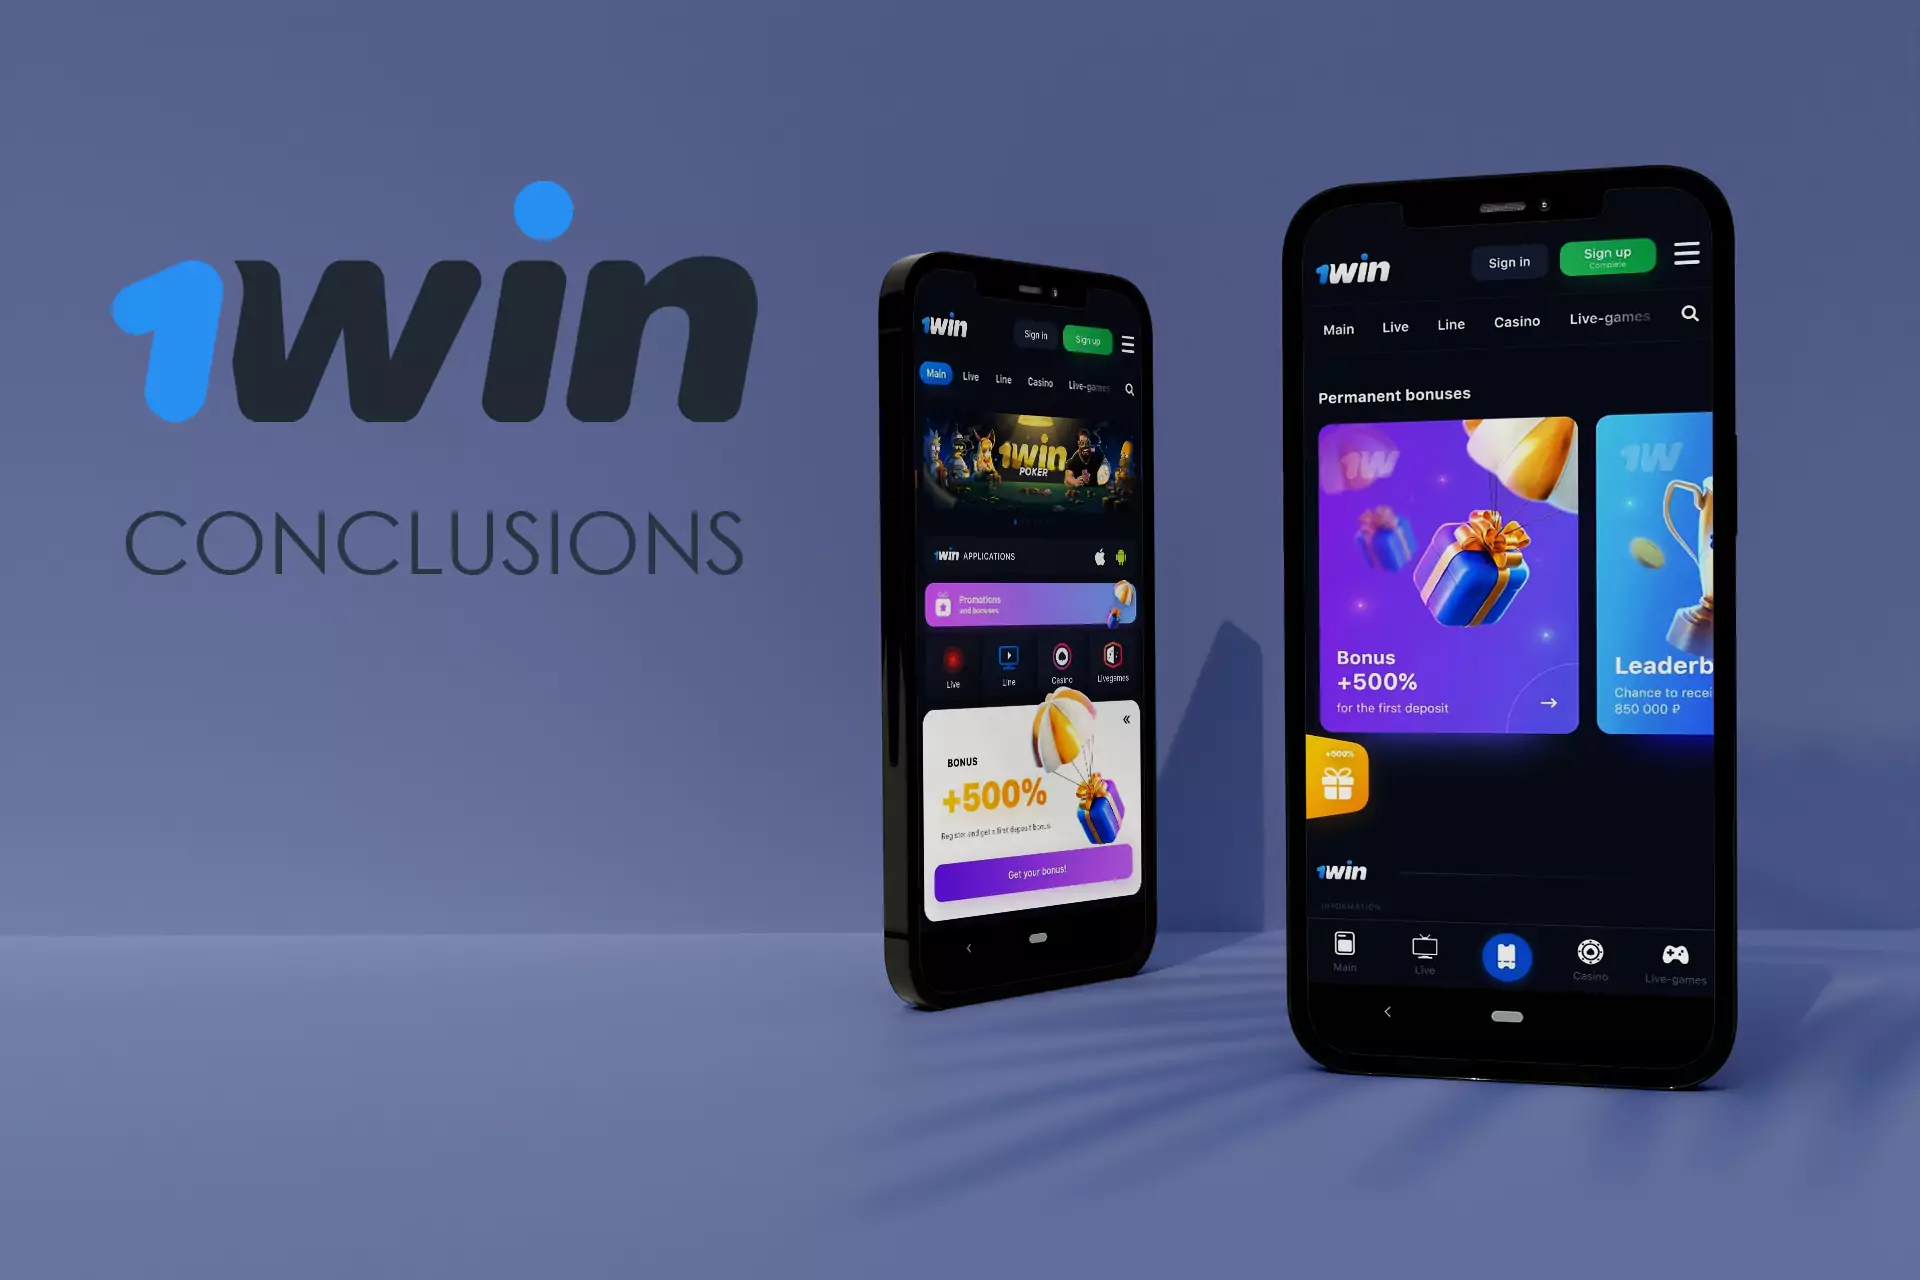 Read about the main benefits of the 1win app in our conclusions.